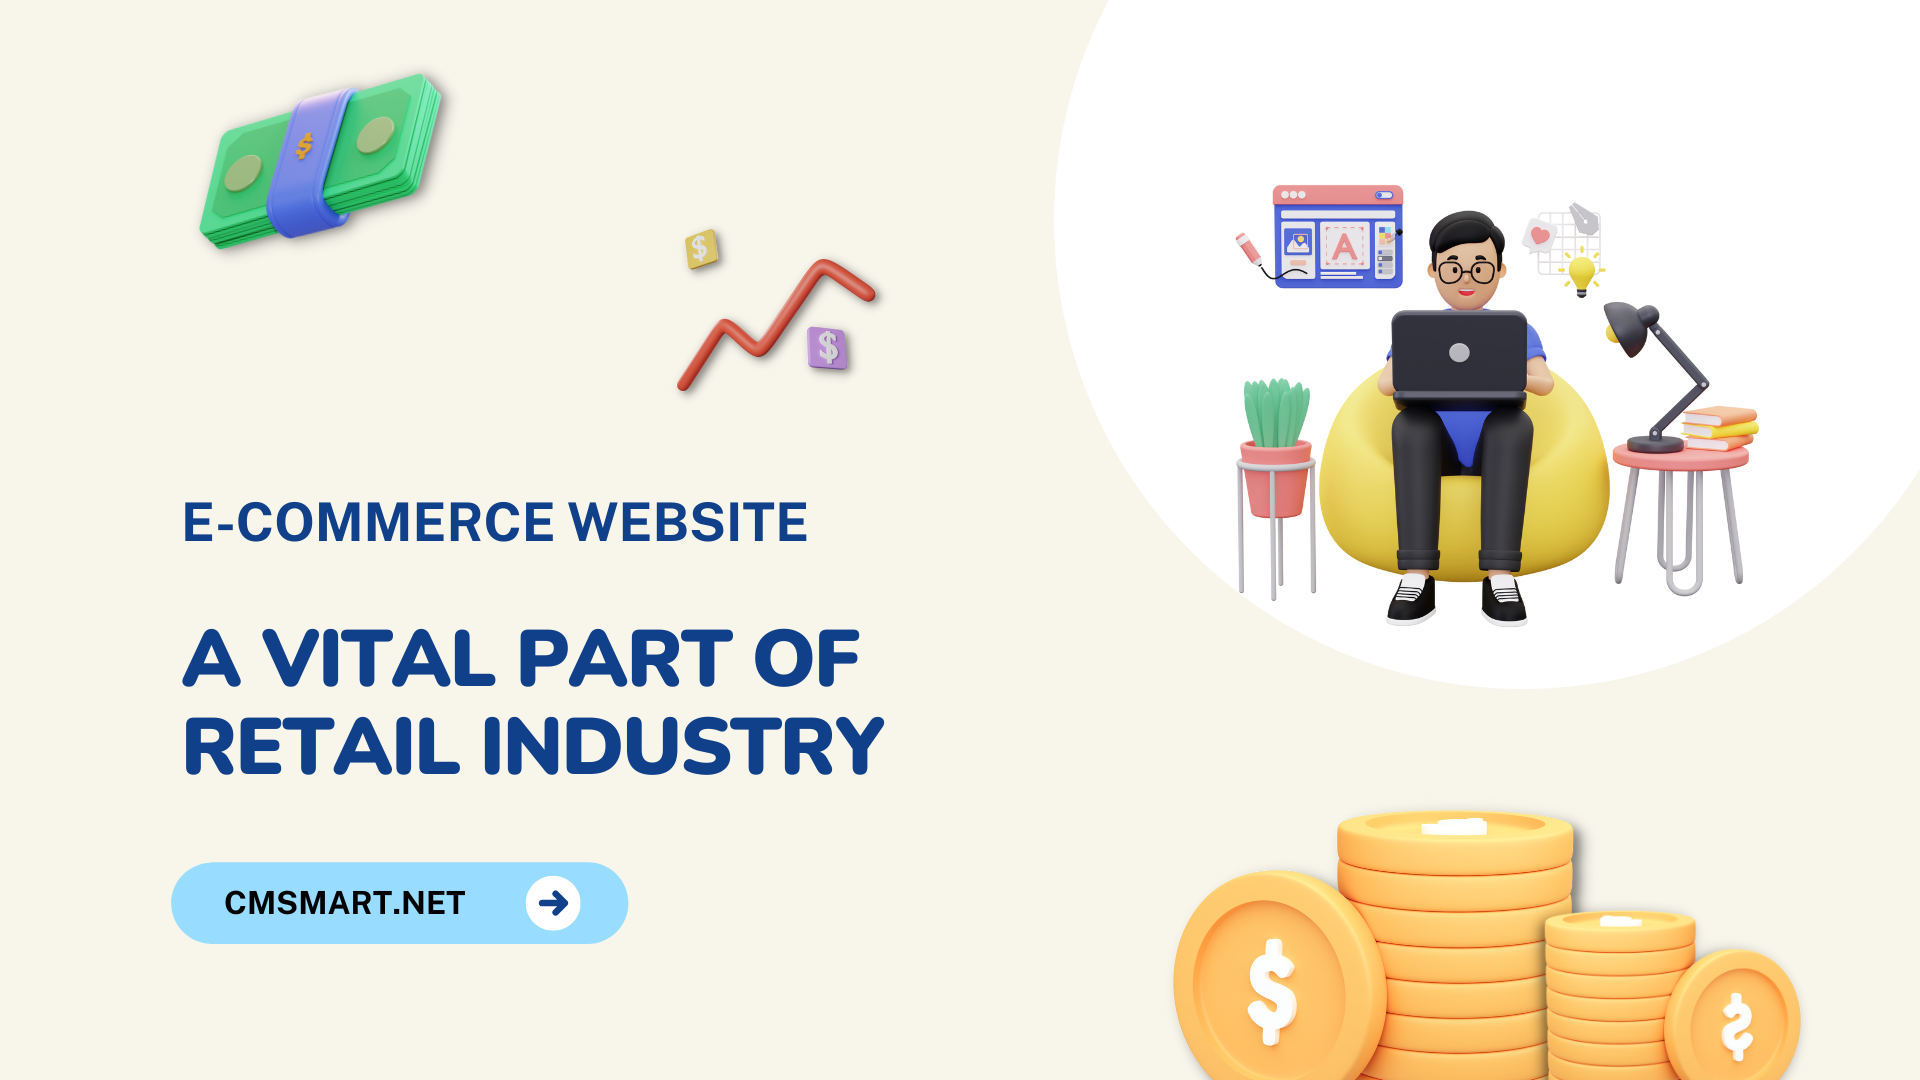 E-commerce website - A vital part of the retail industry